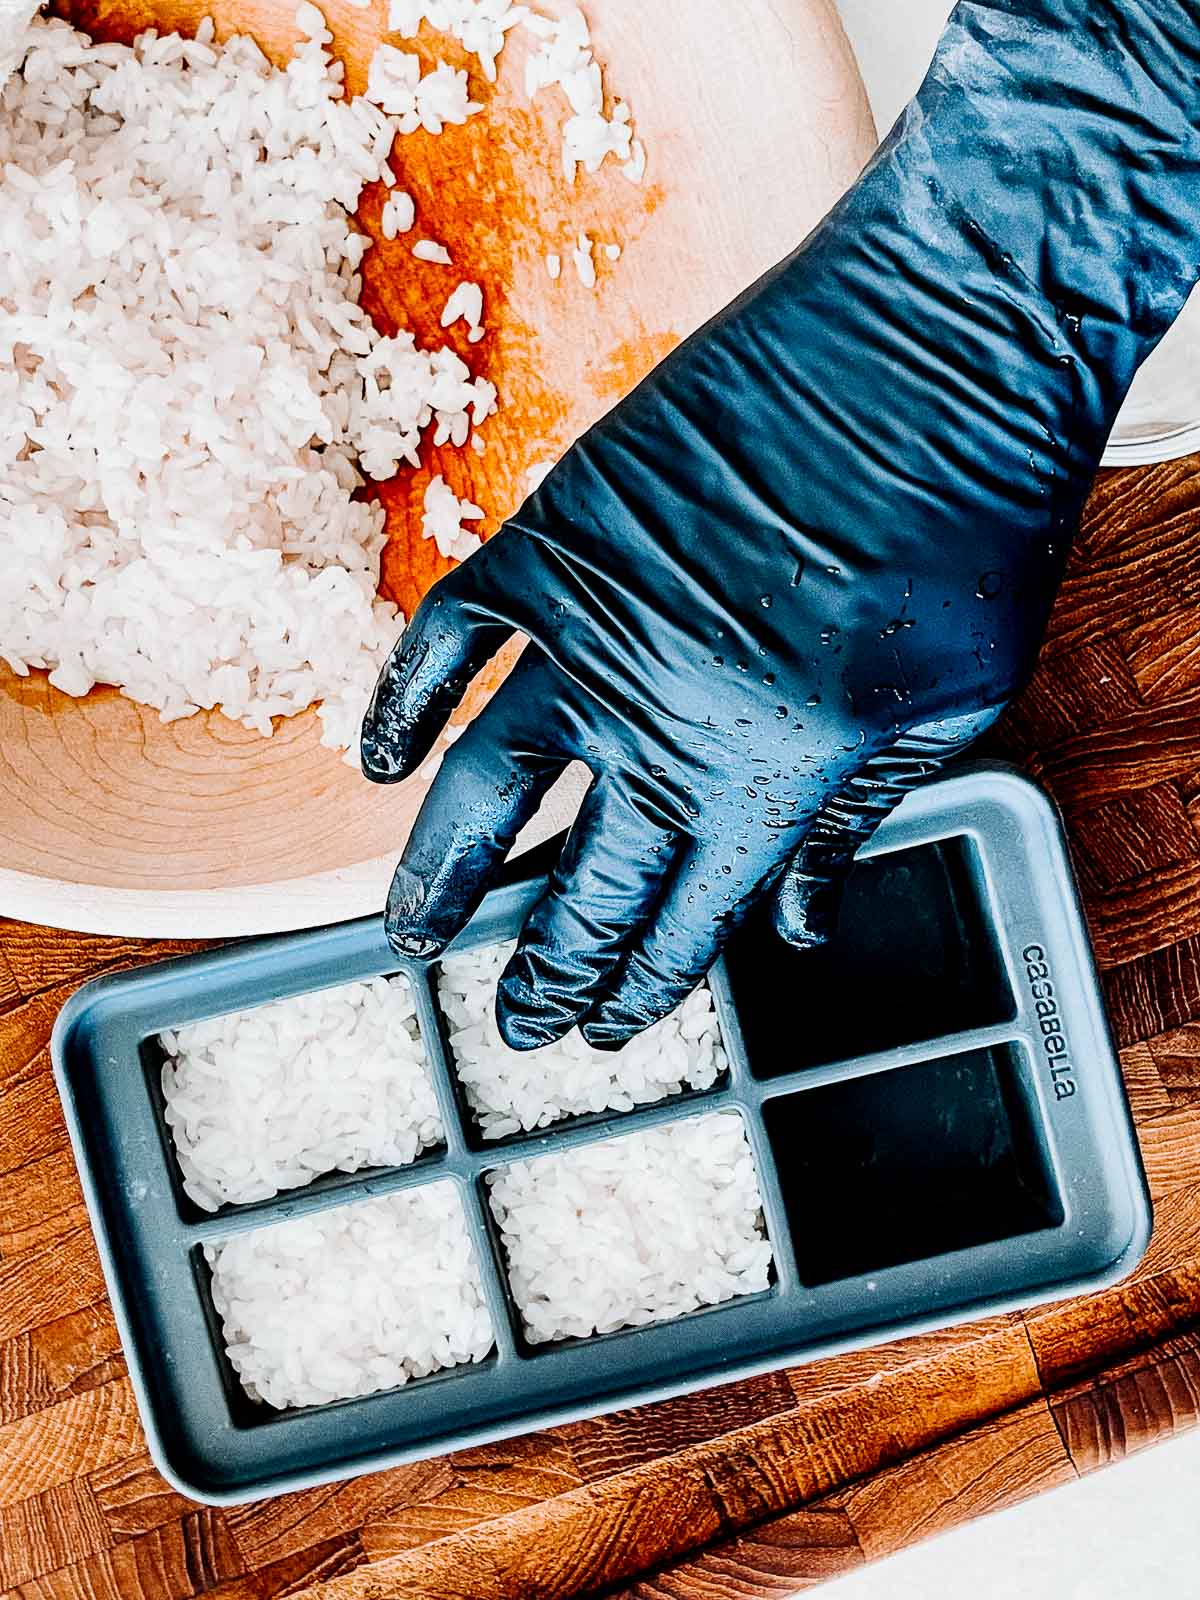 A hand wearing a black glove pressing sushi rice into a black silicone ice cube tray with a wooden bowl filled with sushi rice on the side.